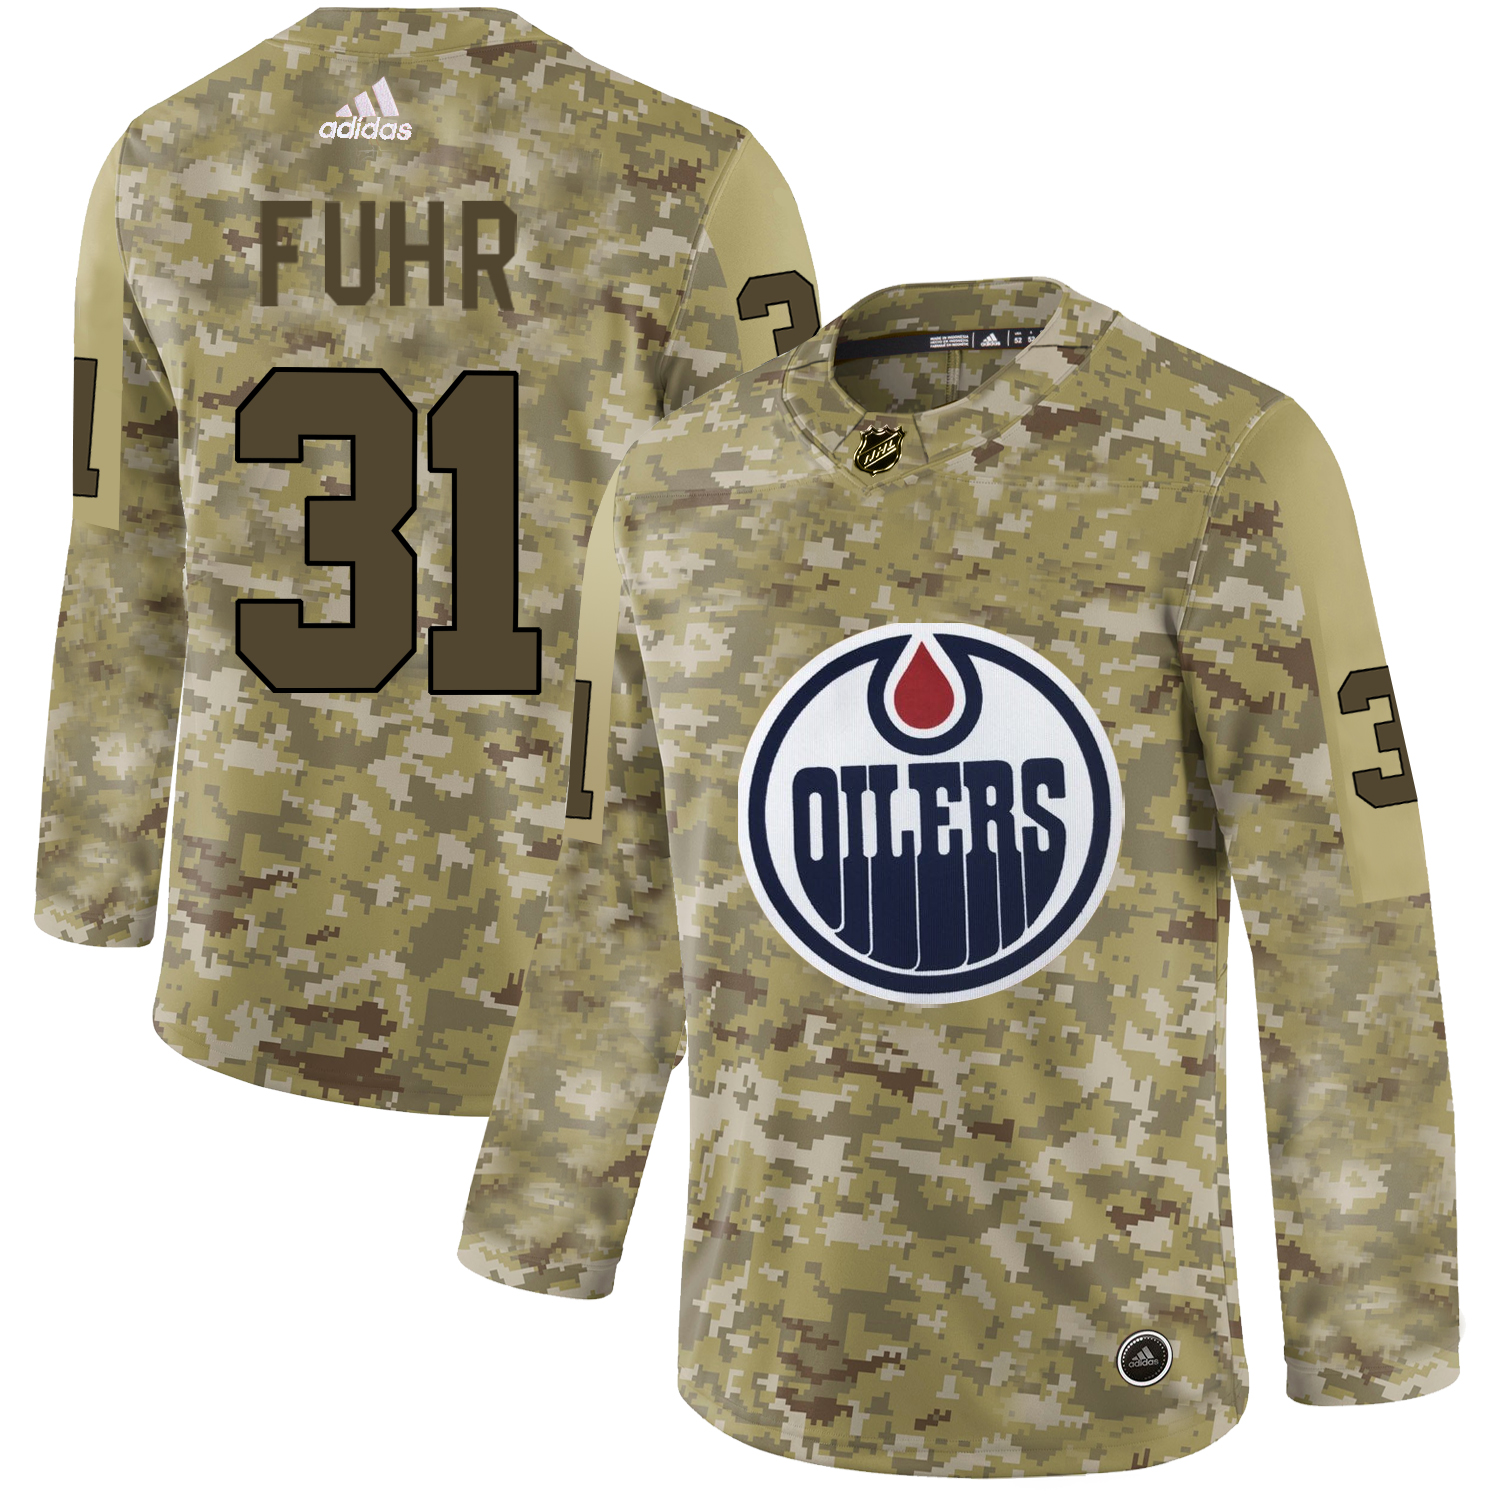 Adidas Oilers #31 Grant Fuhr Camo Authentic Stitched NHL Jersey